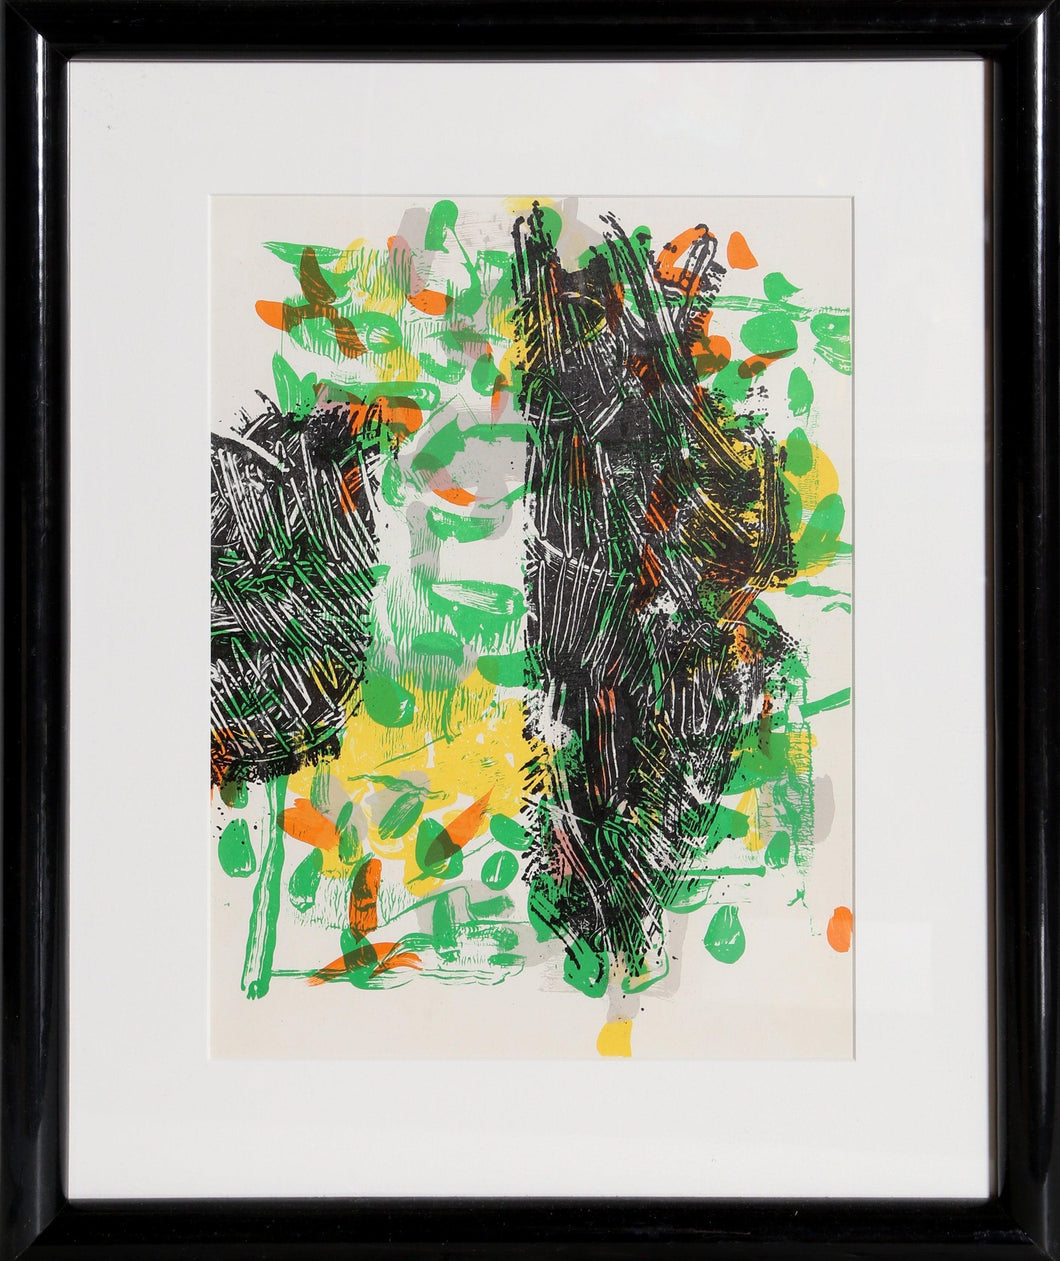 Untitled 1 from Derriere le Miroir Lithograph | Jean-Paul Riopelle,{{product.type}}